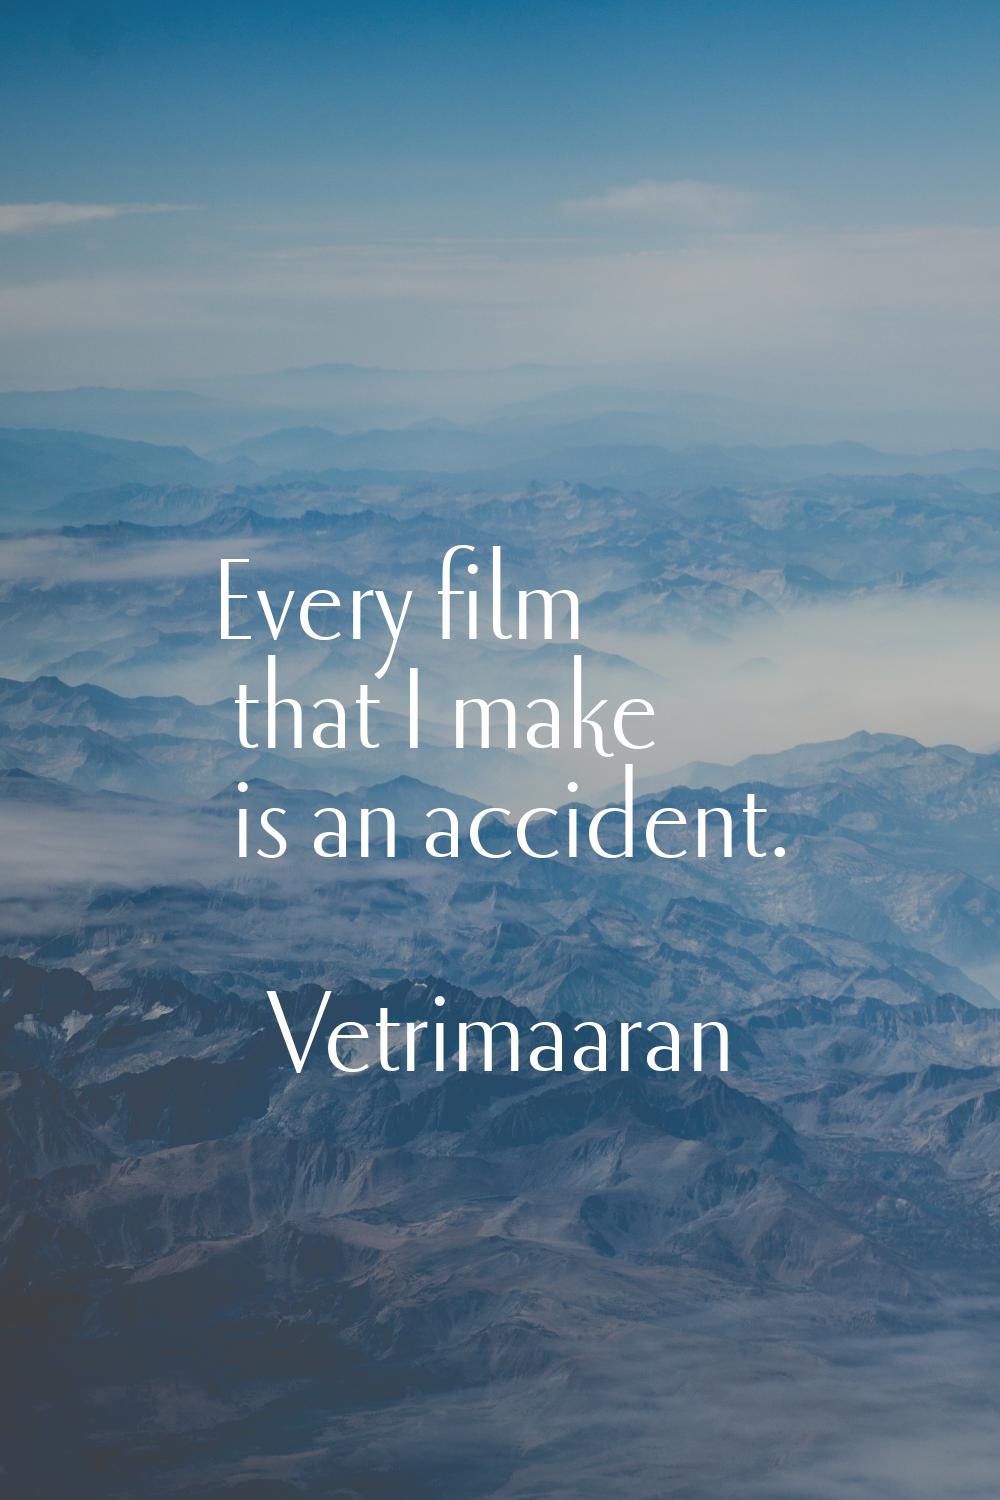 Every film that I make is an accident.